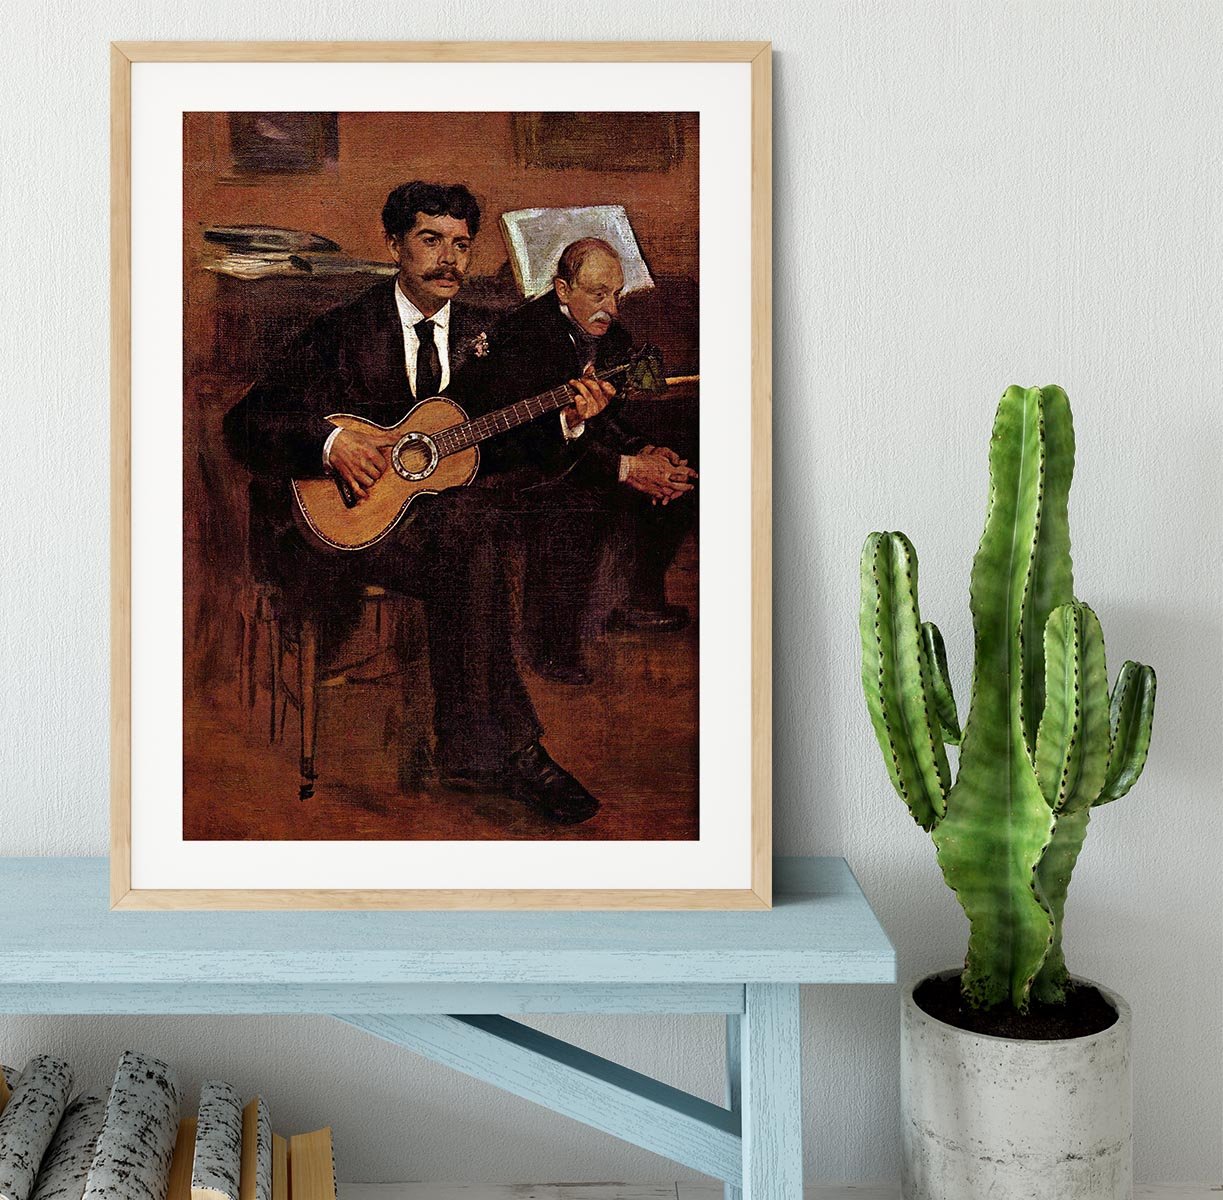 The guitarist Pagans and Monsieur Degas by Manet Framed Print - Canvas Art Rocks - 3